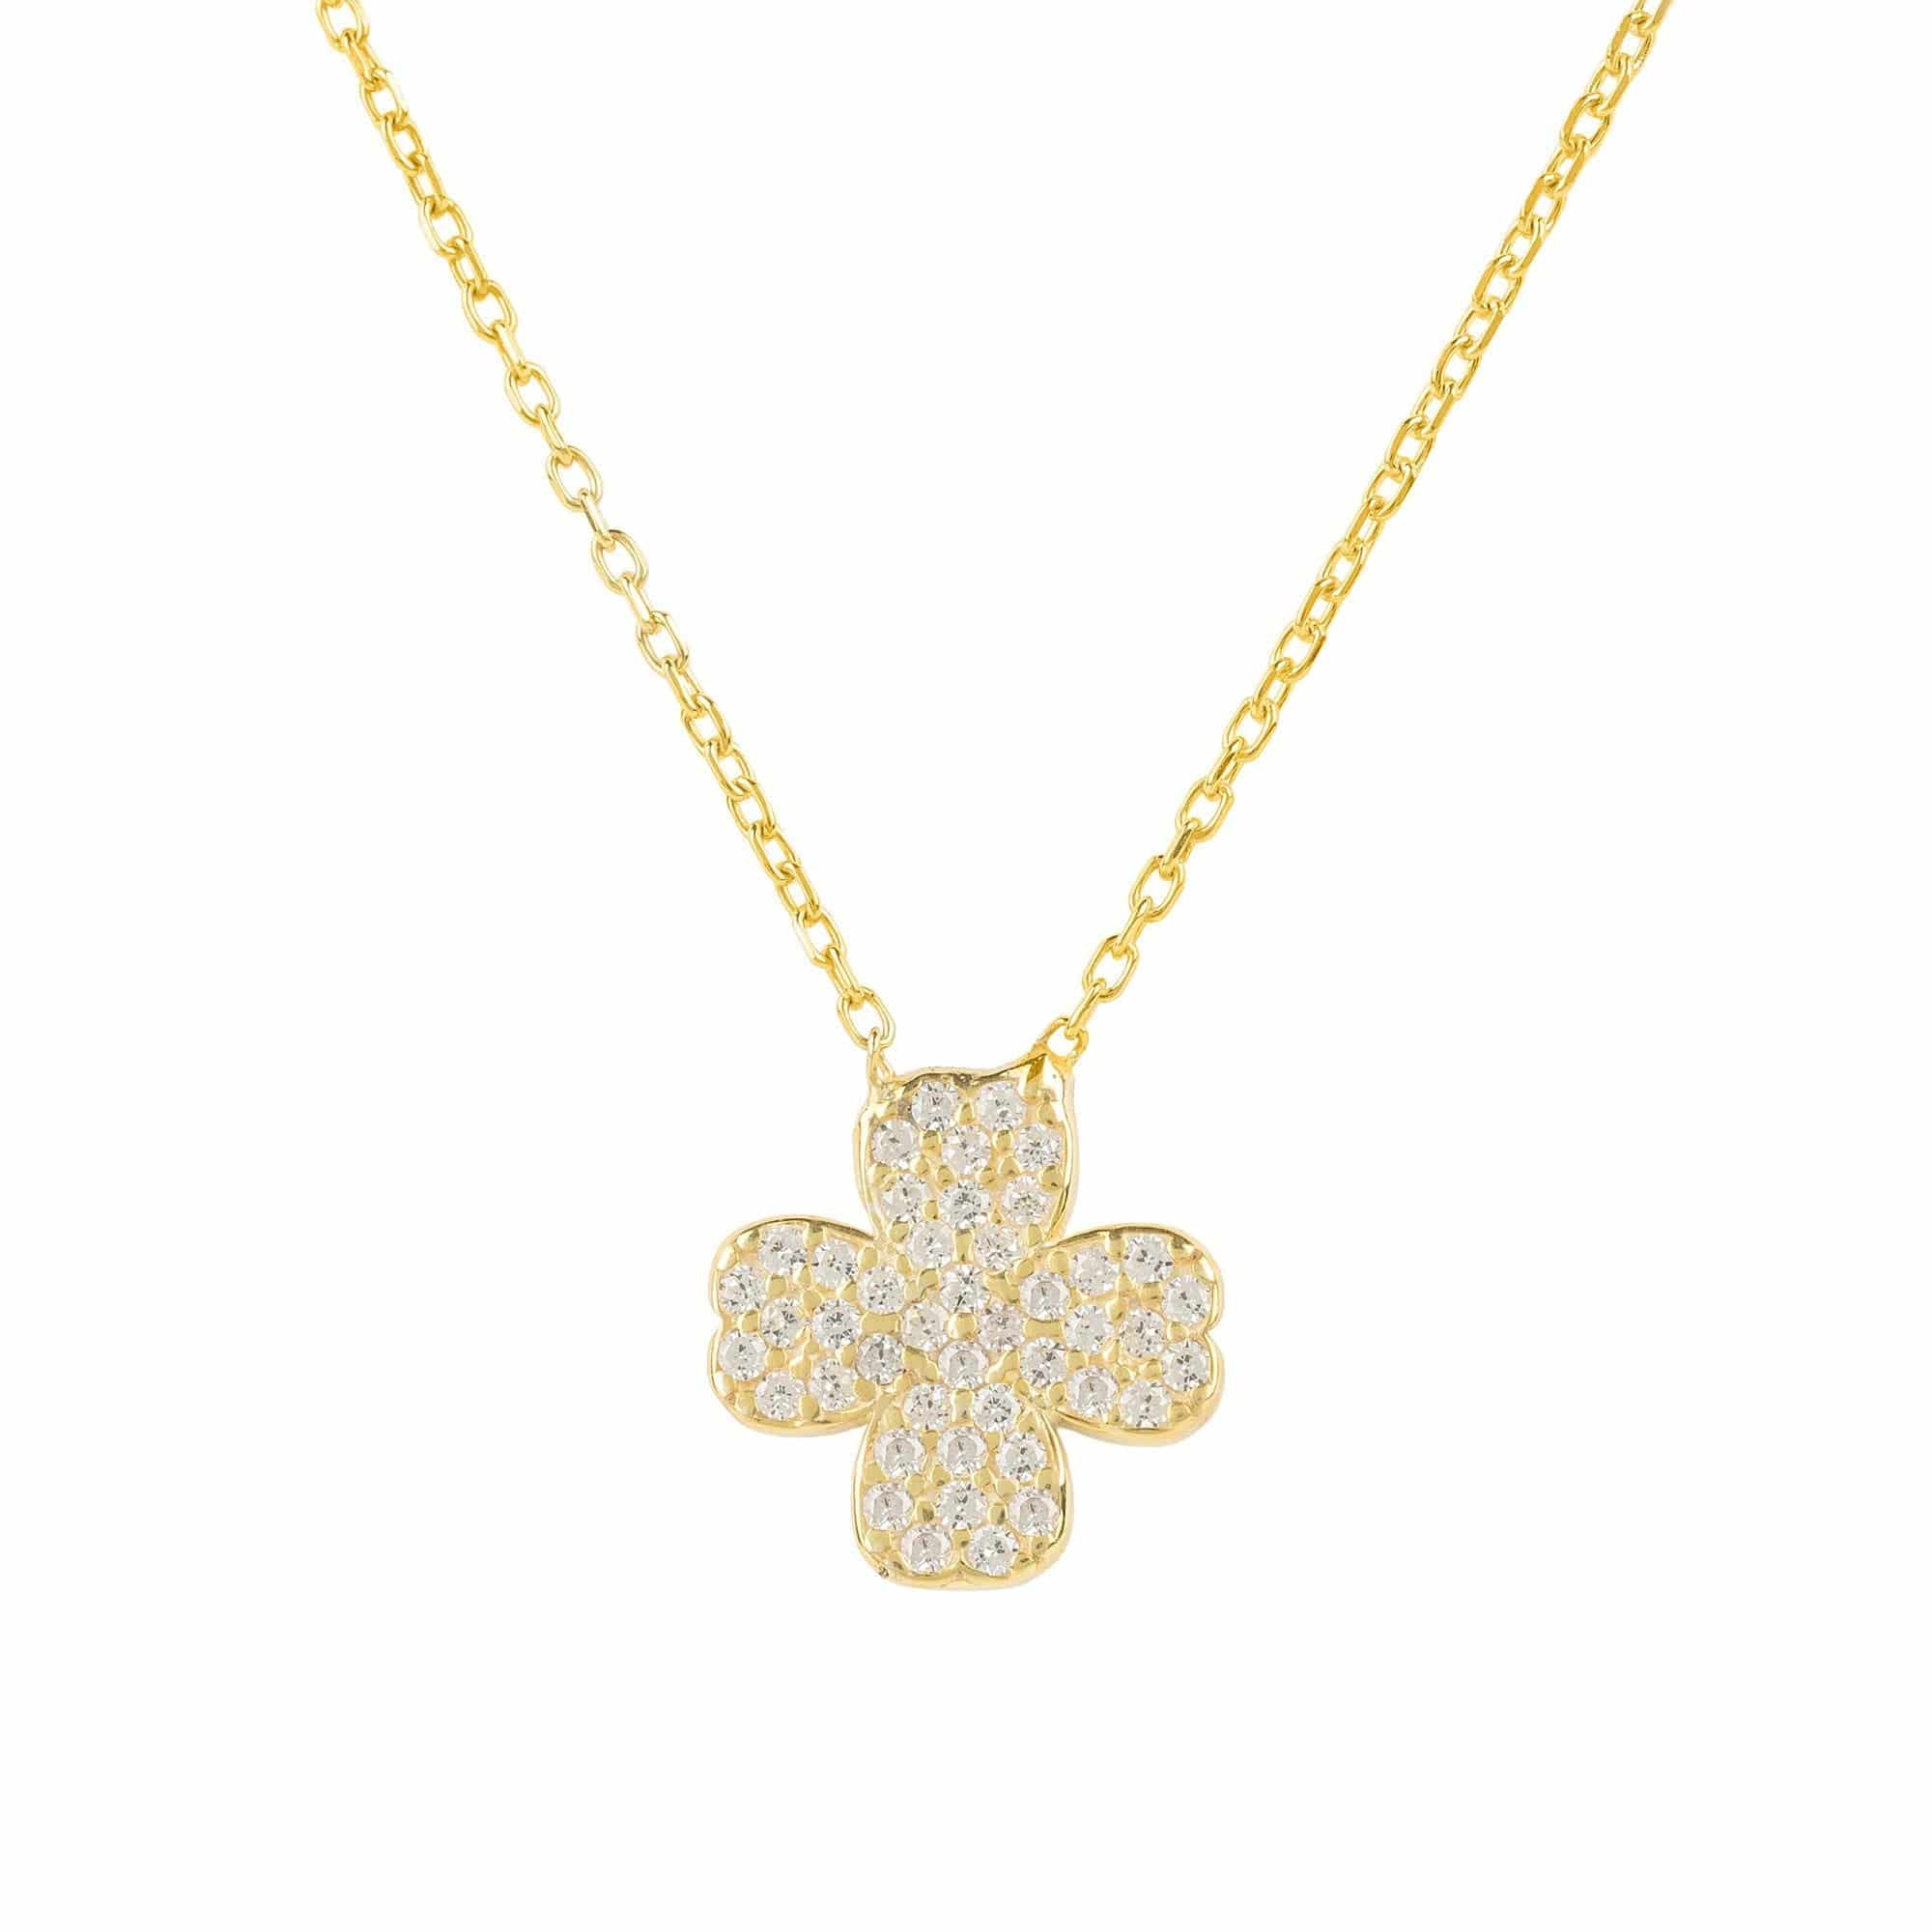 Lucky Clover Floral Charms Women's Necklace in Silver/ Rose Gold| Eunoia SELECTS Rose Gold / White